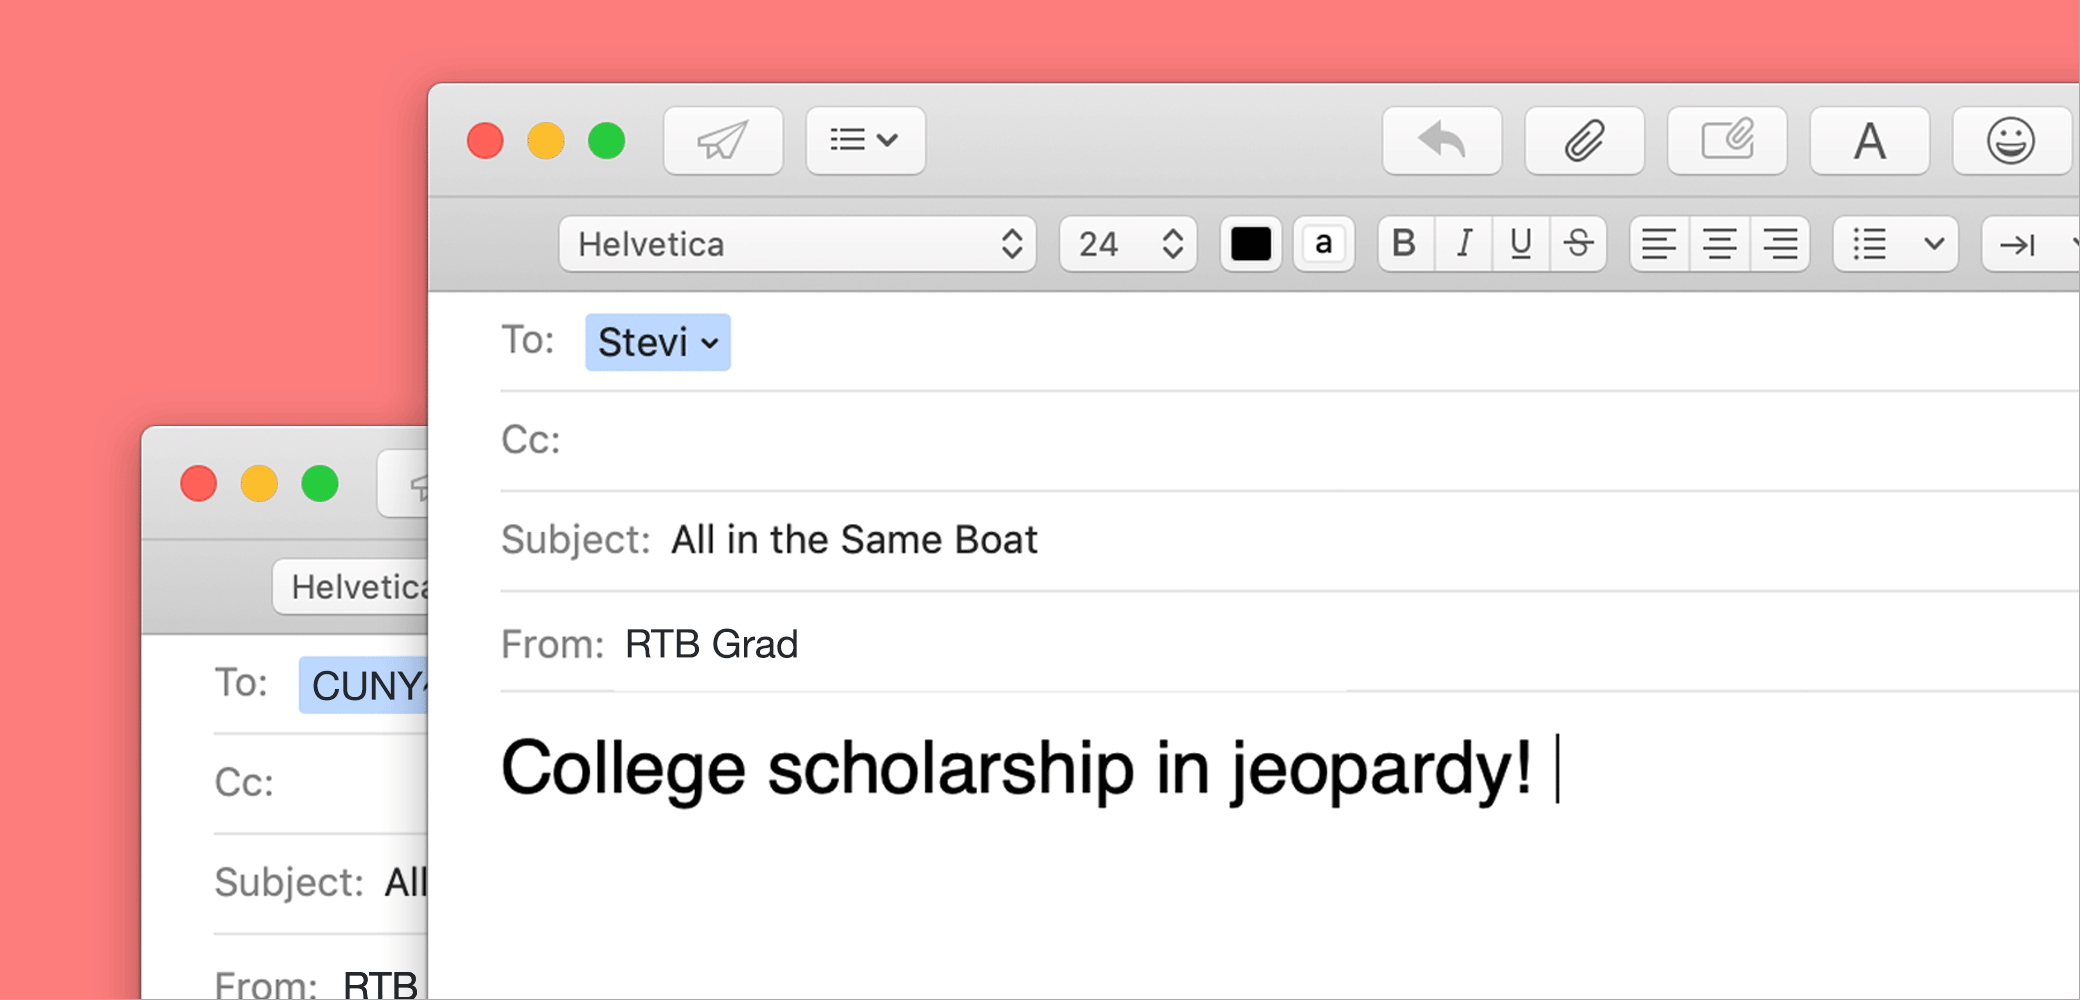 all in the same boat - college scholarship in jeopardy